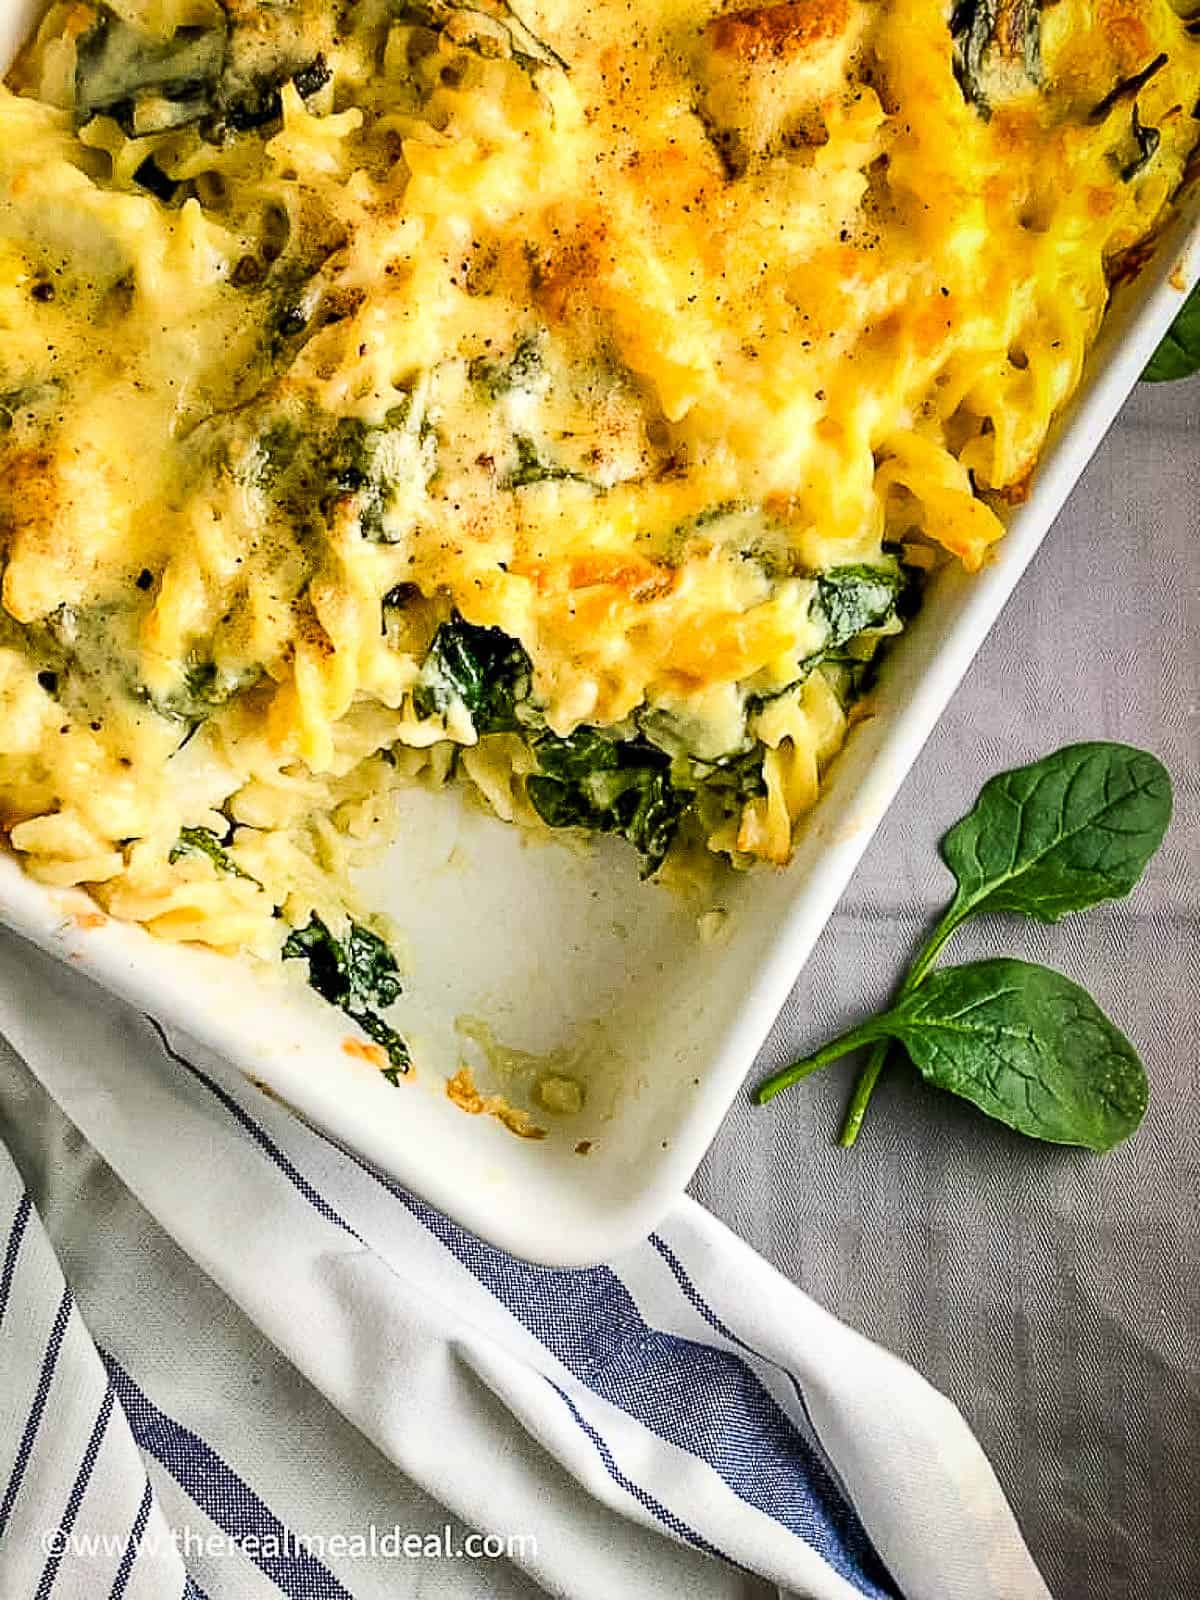 cauliflower cheese pasta bake with spinach in tray portion removed